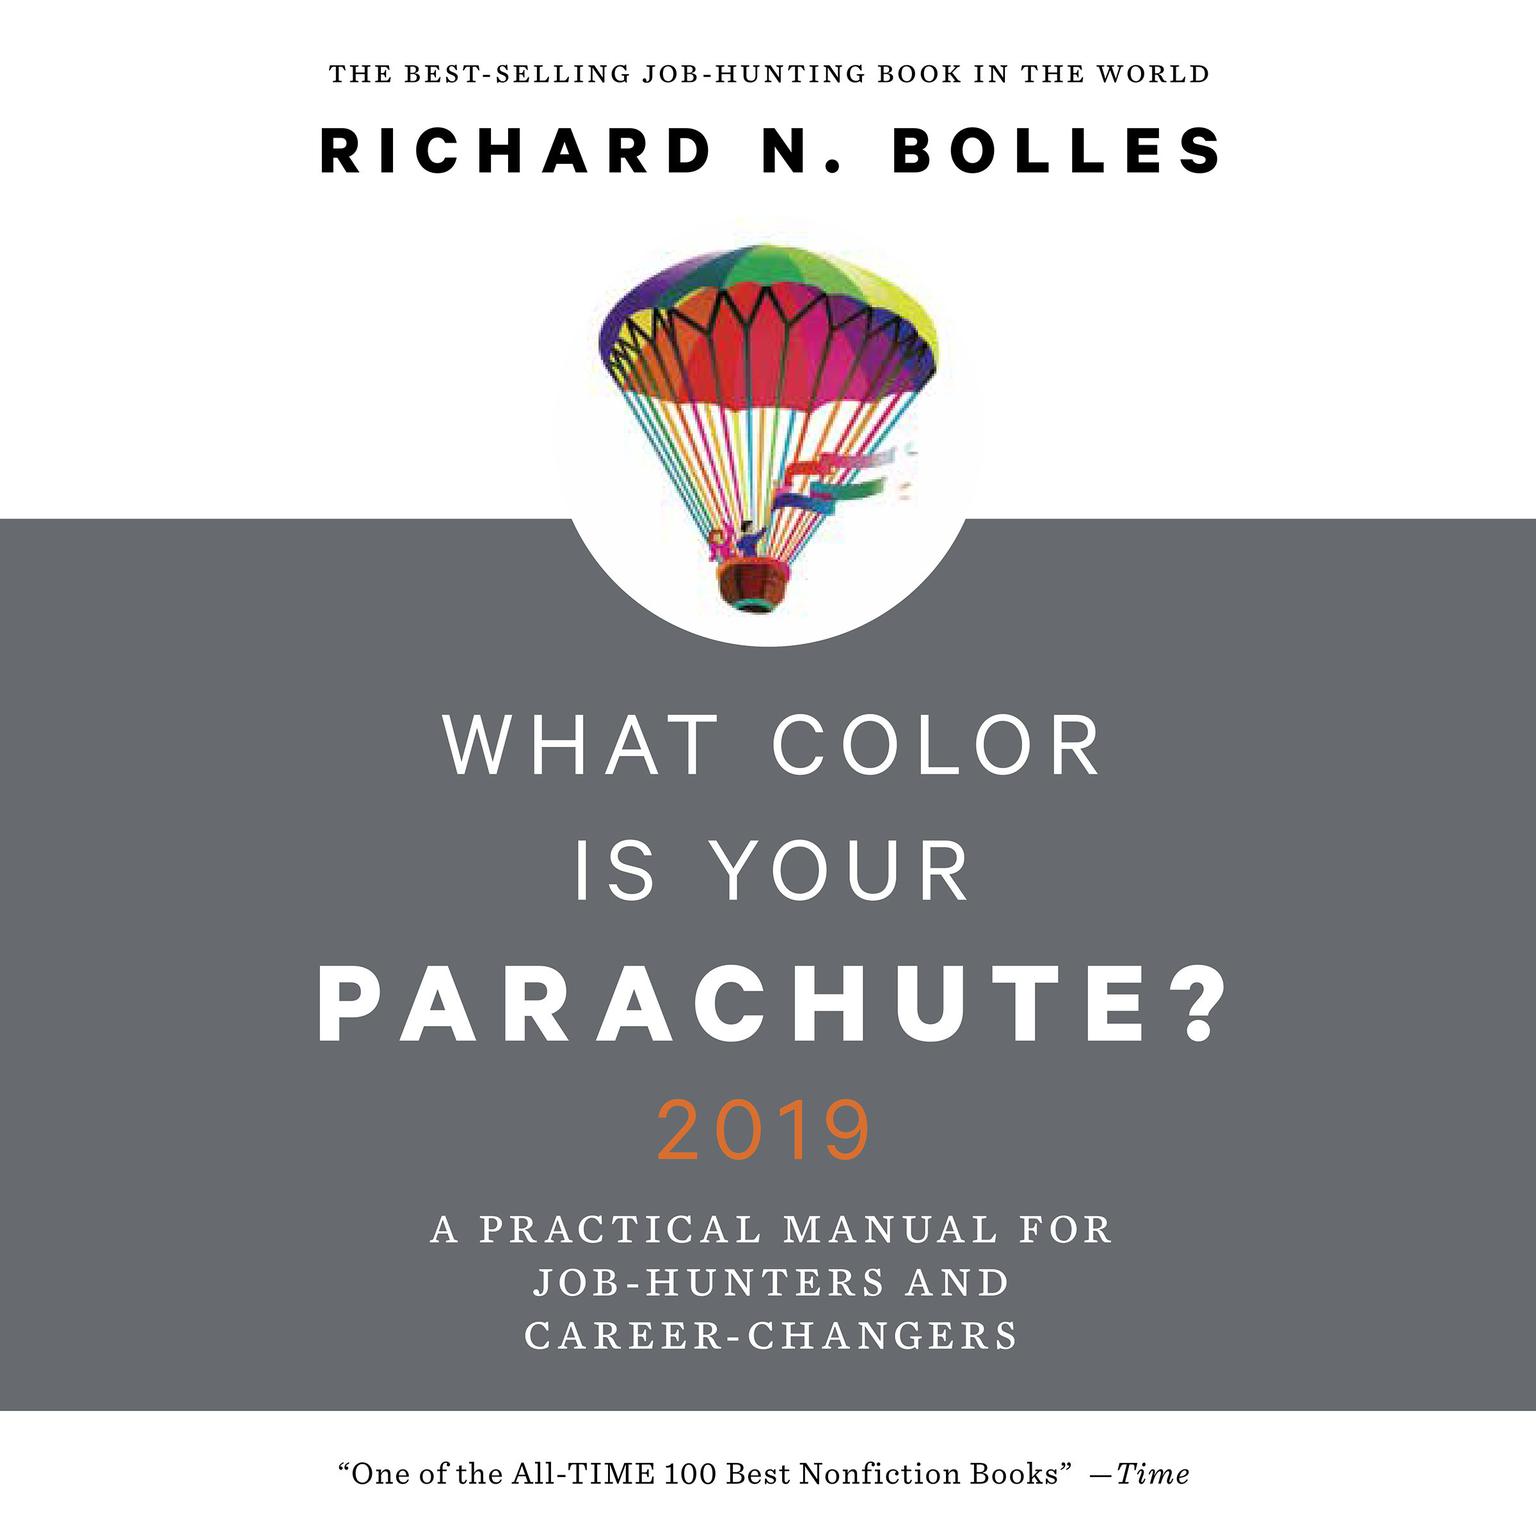 What Color Is Your Parachute? 2019: A Practical Manual for Job-Hunters and Career-Changers Audiobook, by Richard N. Bolles